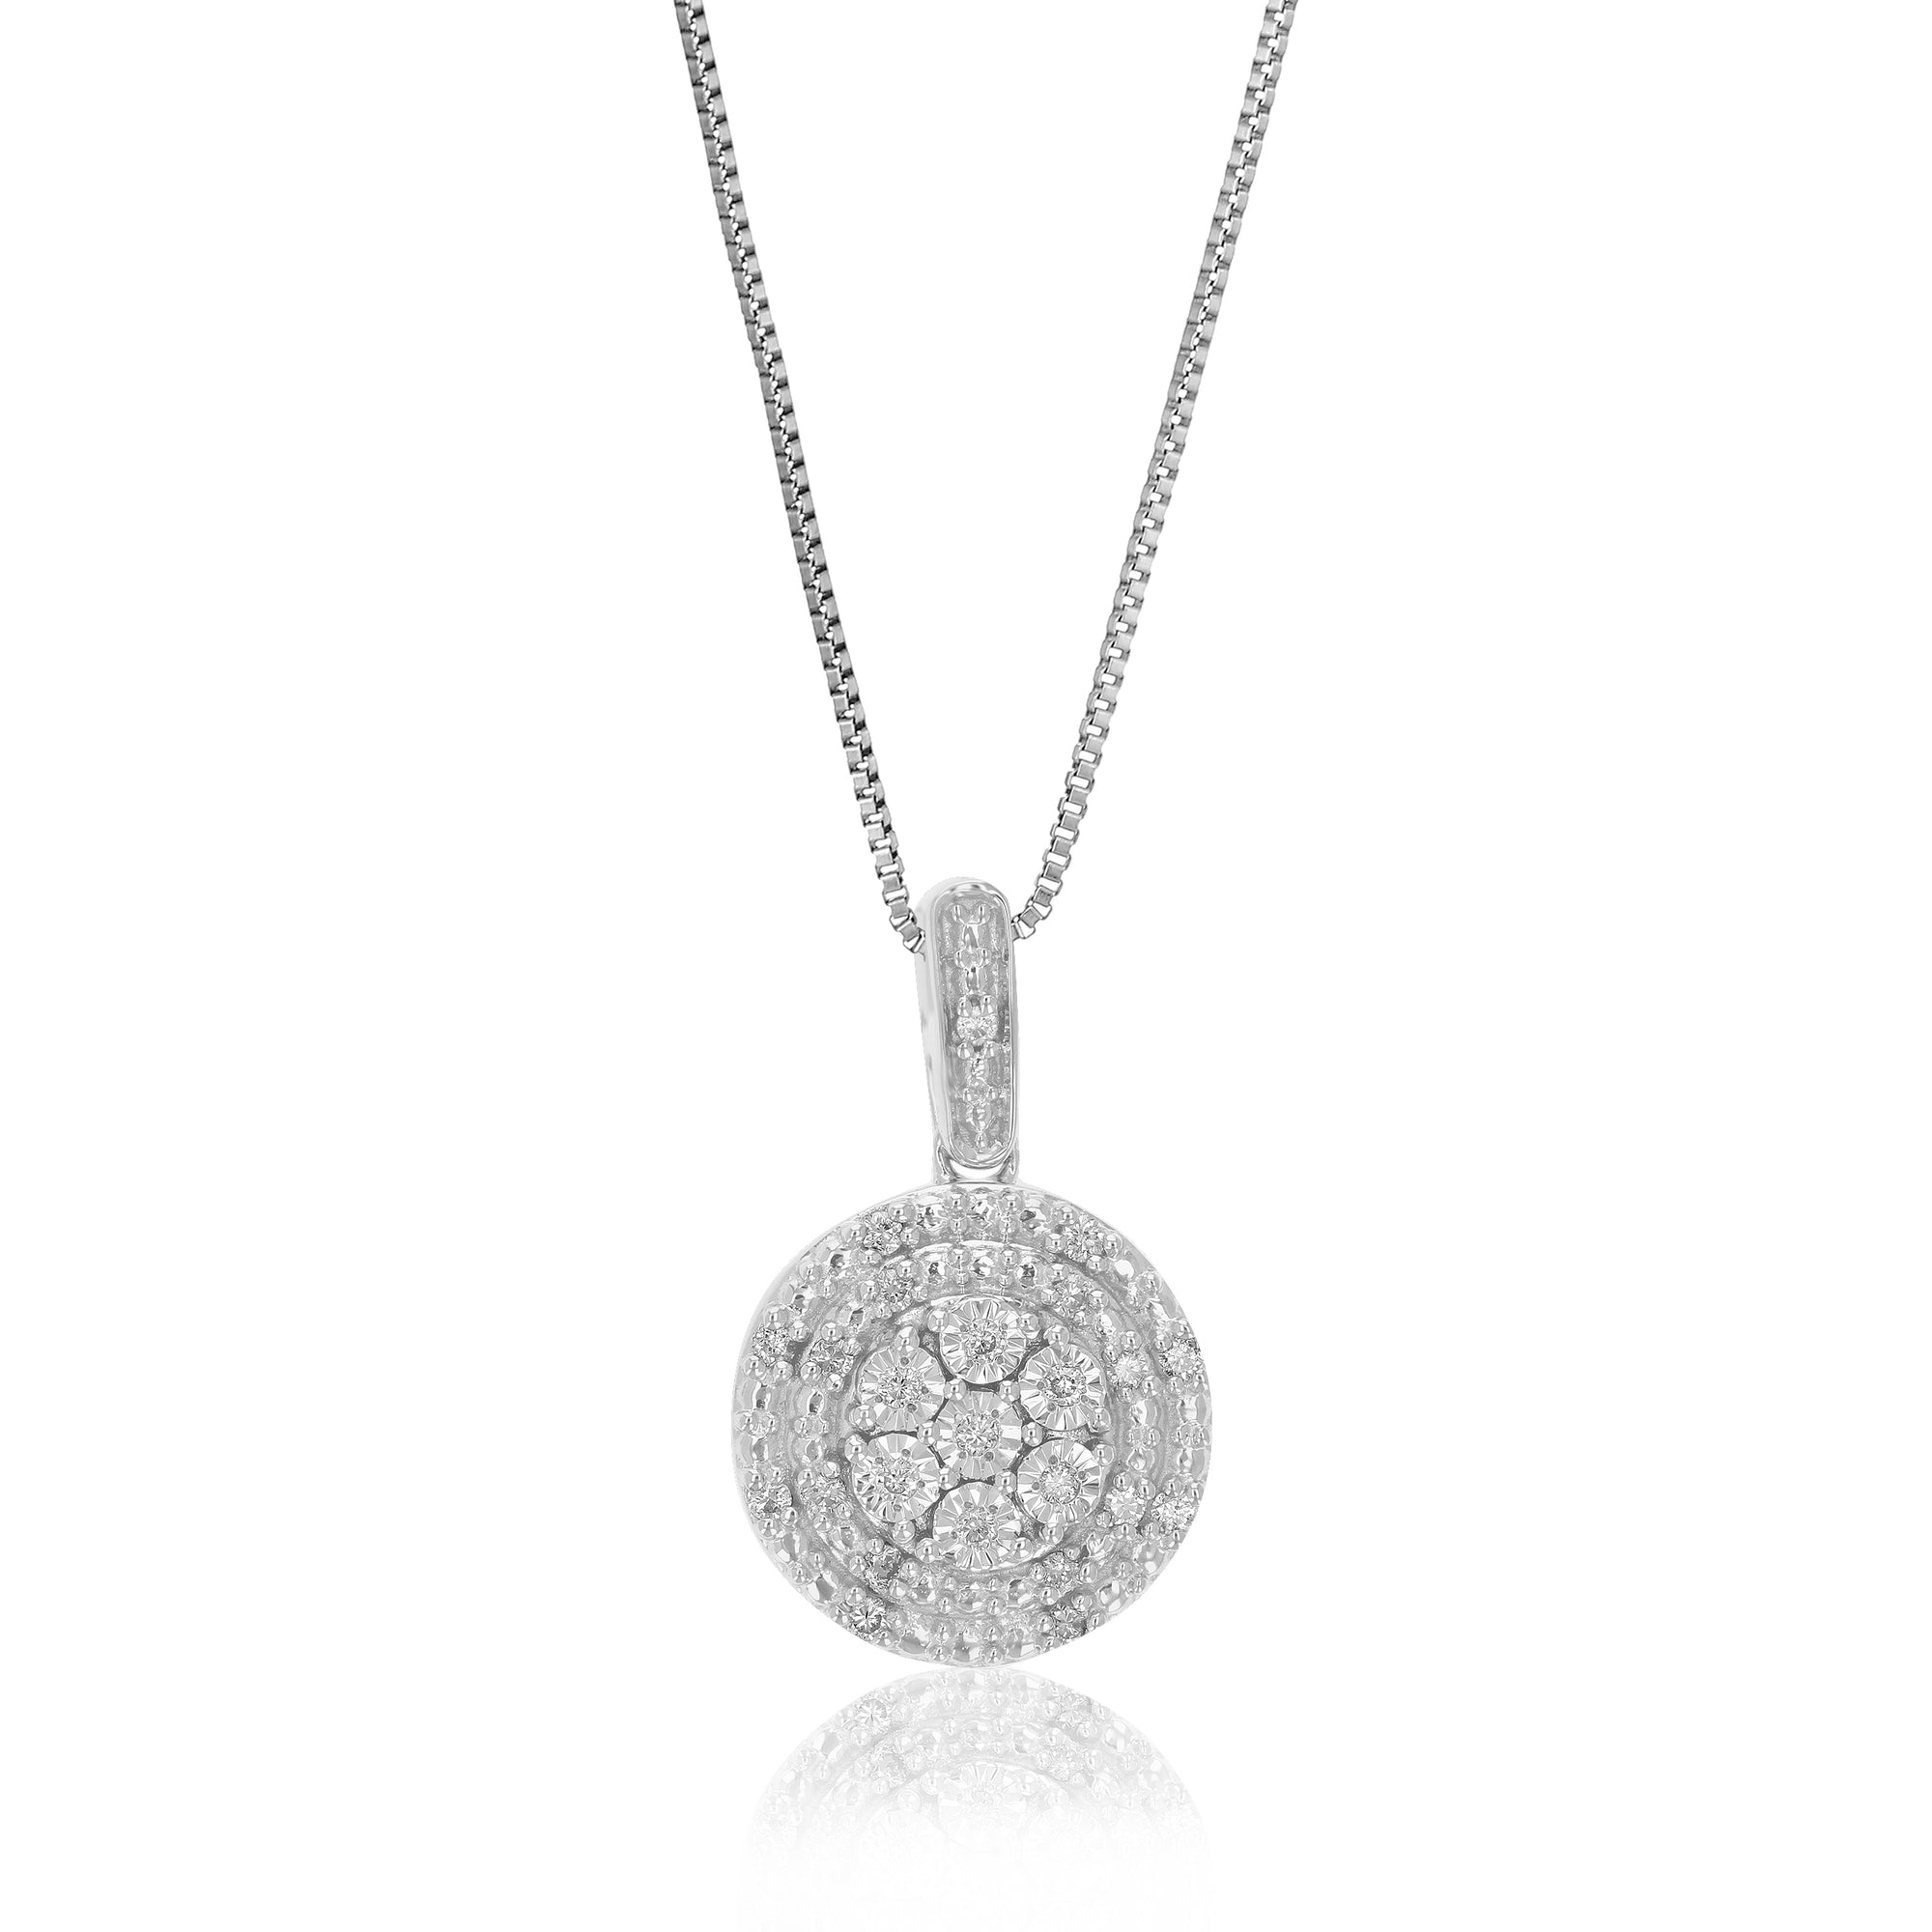 1/10 cttw Diamond Pendant Necklace for Women, Lab Grown Diamond Round Pendant Necklace in .925 Sterling Silver with Chain, Size 3/4 Inch